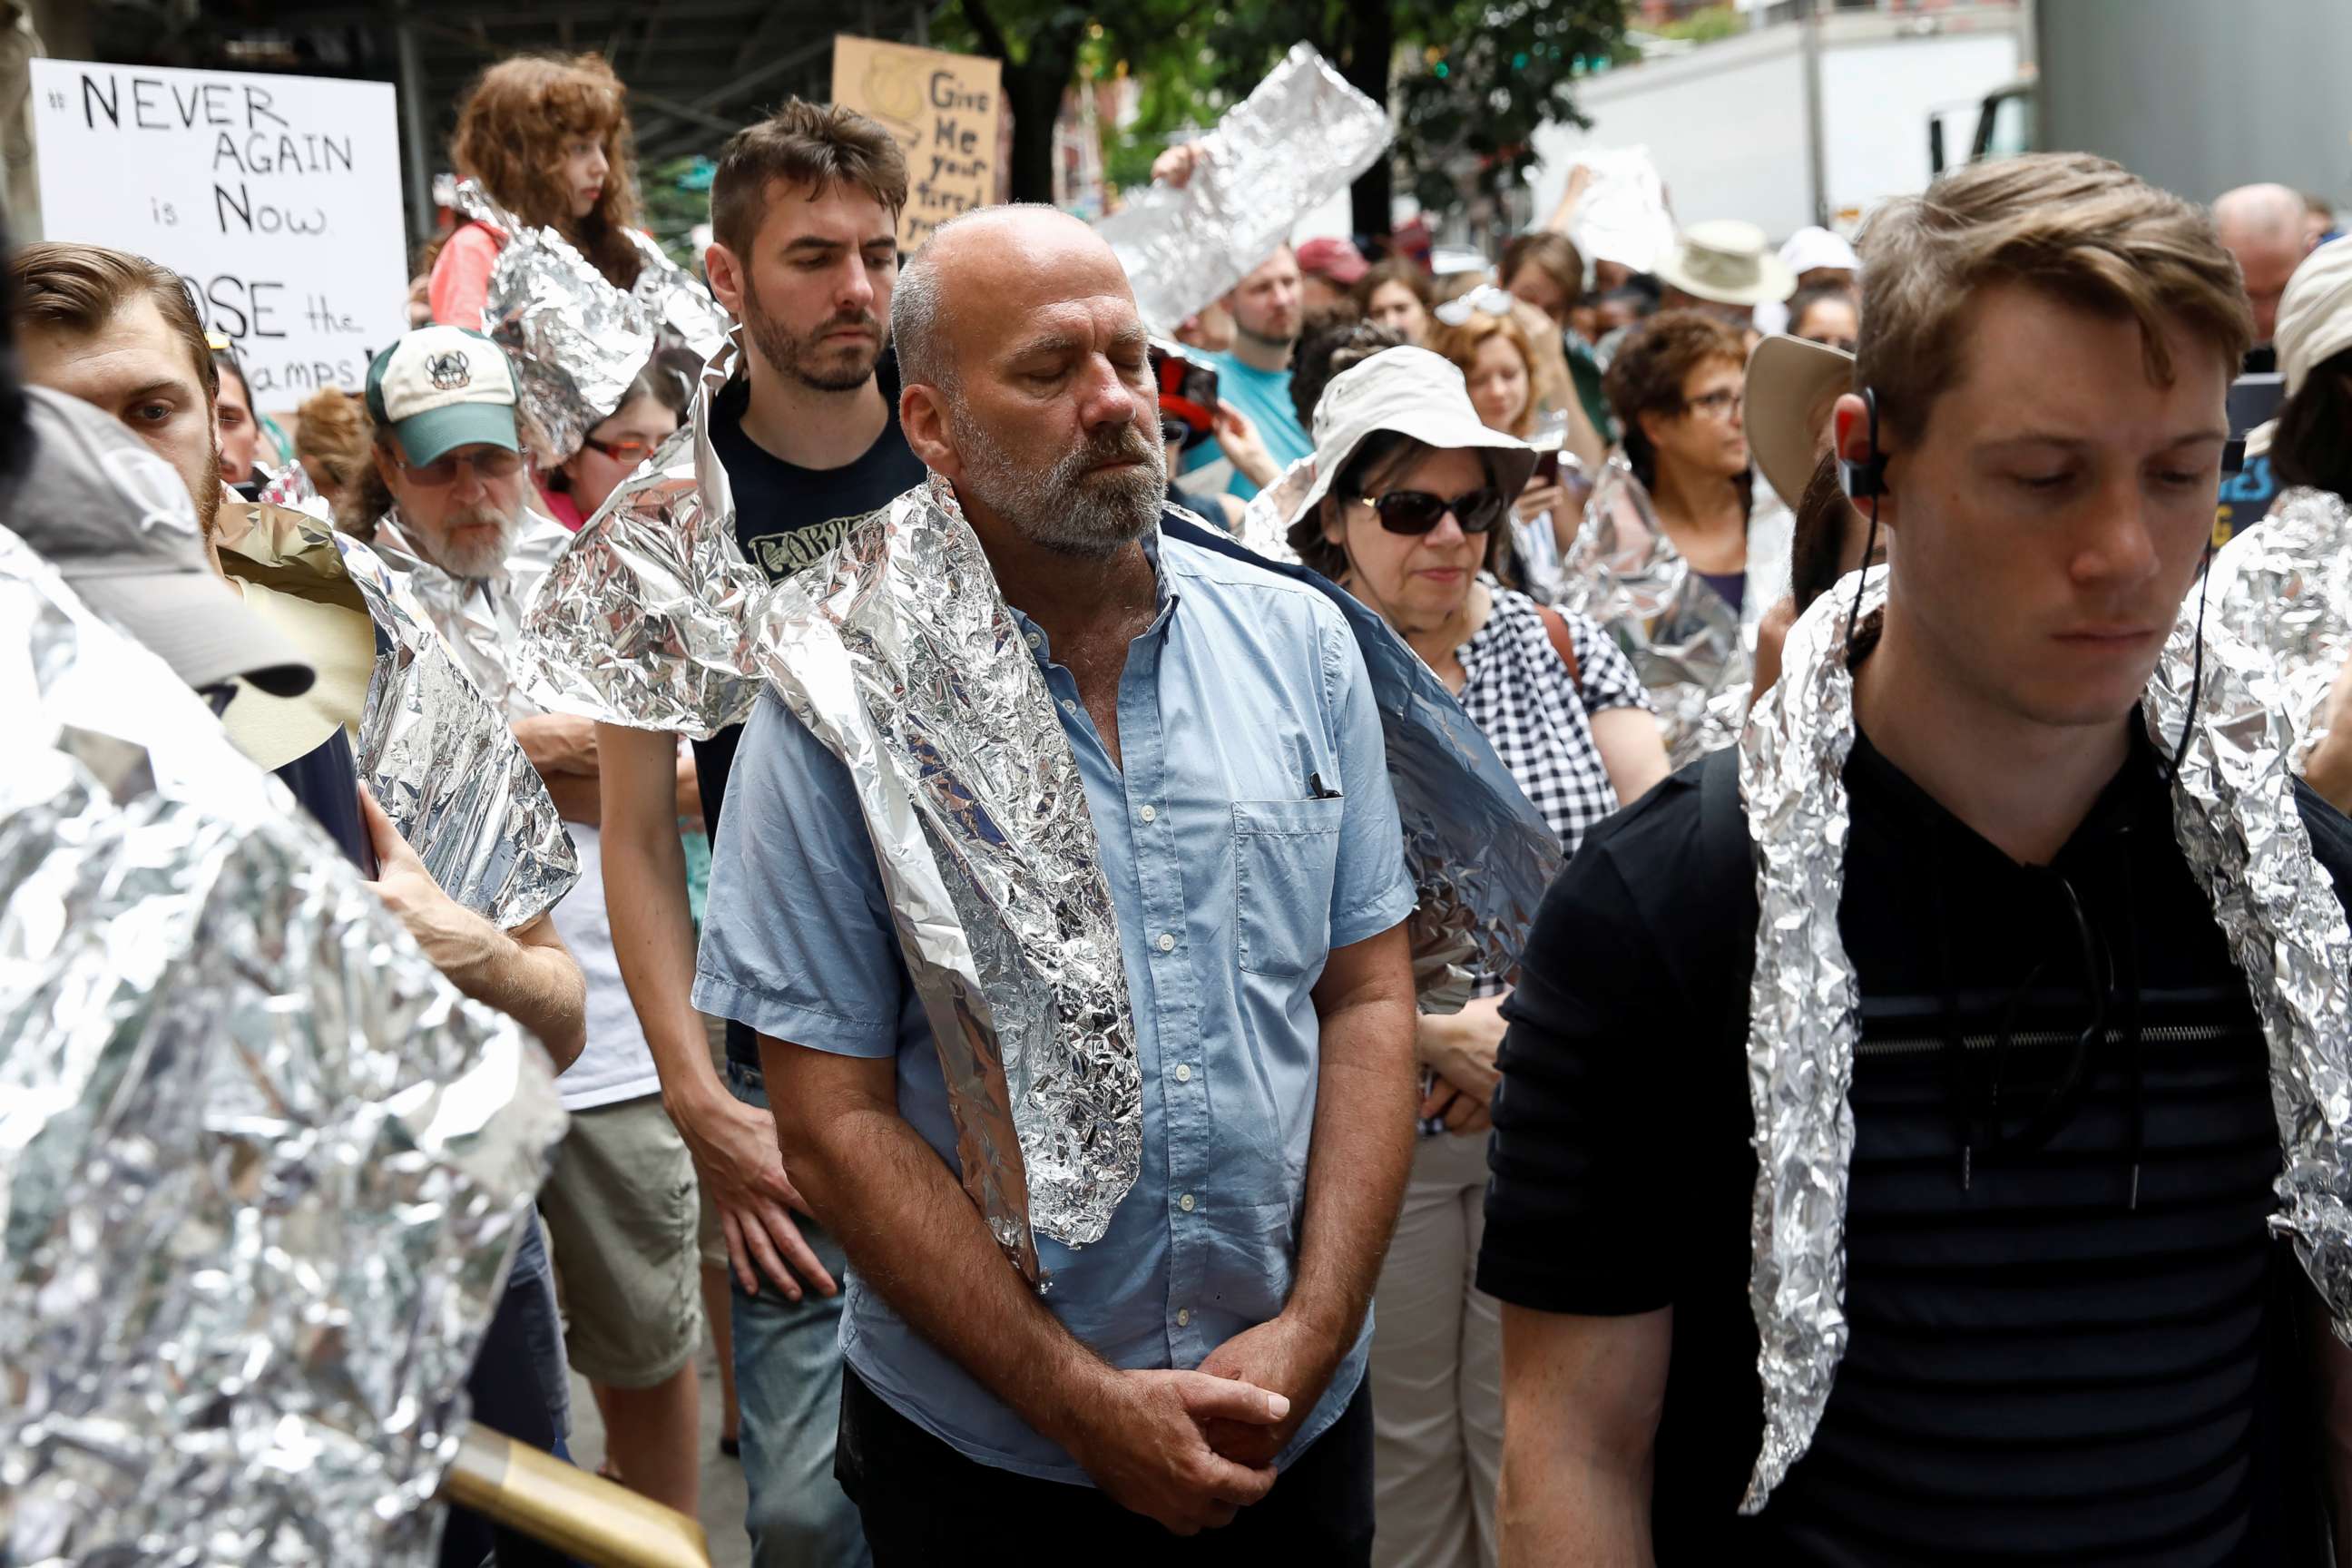 PHOTO: Demonstrators take a moment of silence in a 'Close the Camps' rally to demand the closure of inhumane immigrant detention centers outside the Middle Collegiate Church in New York, July 2, 2019.